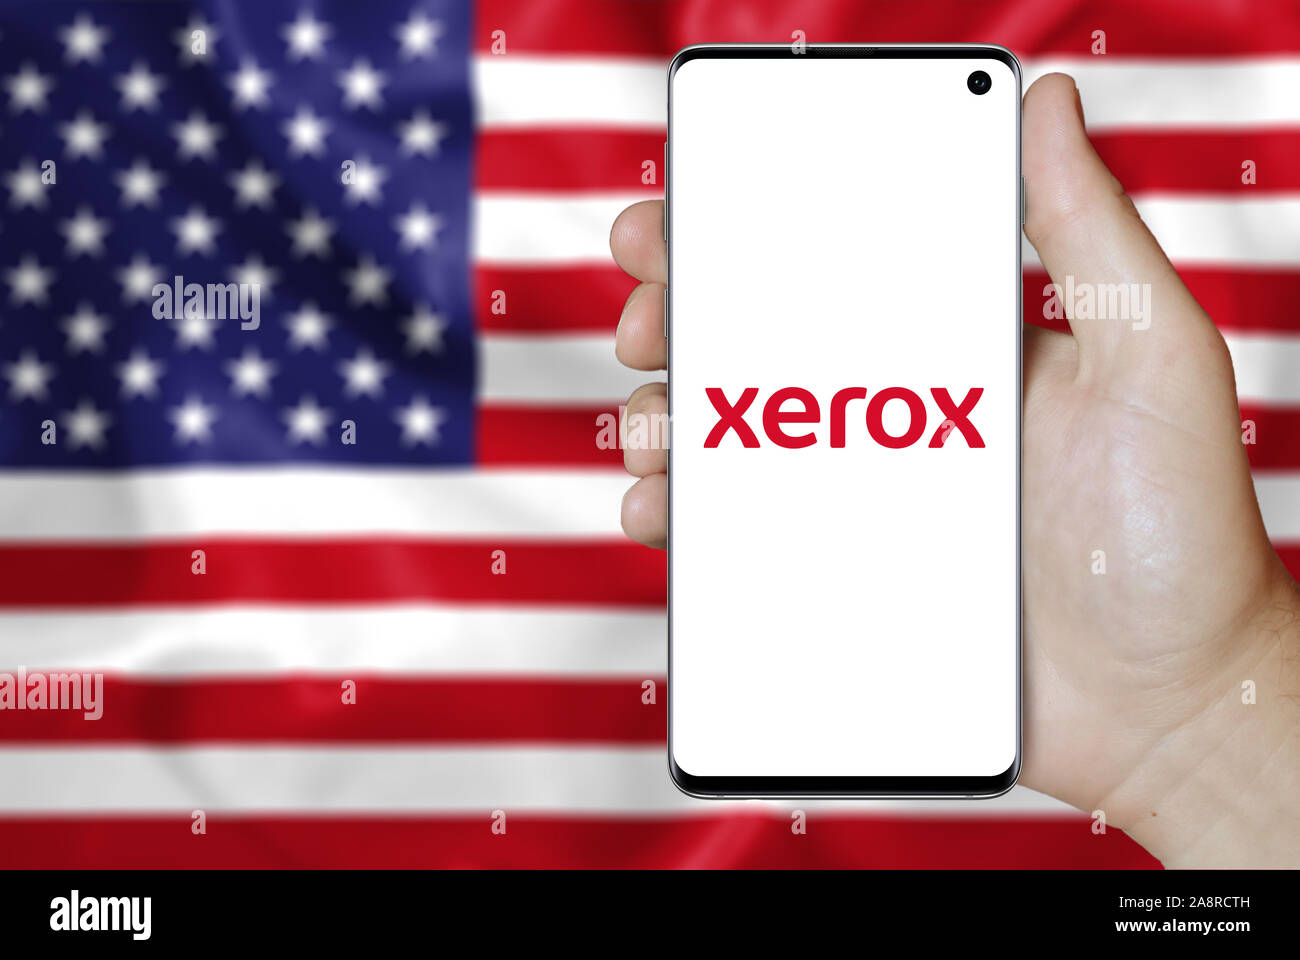 Logo of public company Xerox displayed on a smartphone. Flag of USA background. Credit: PIXDUCE Stock Photo